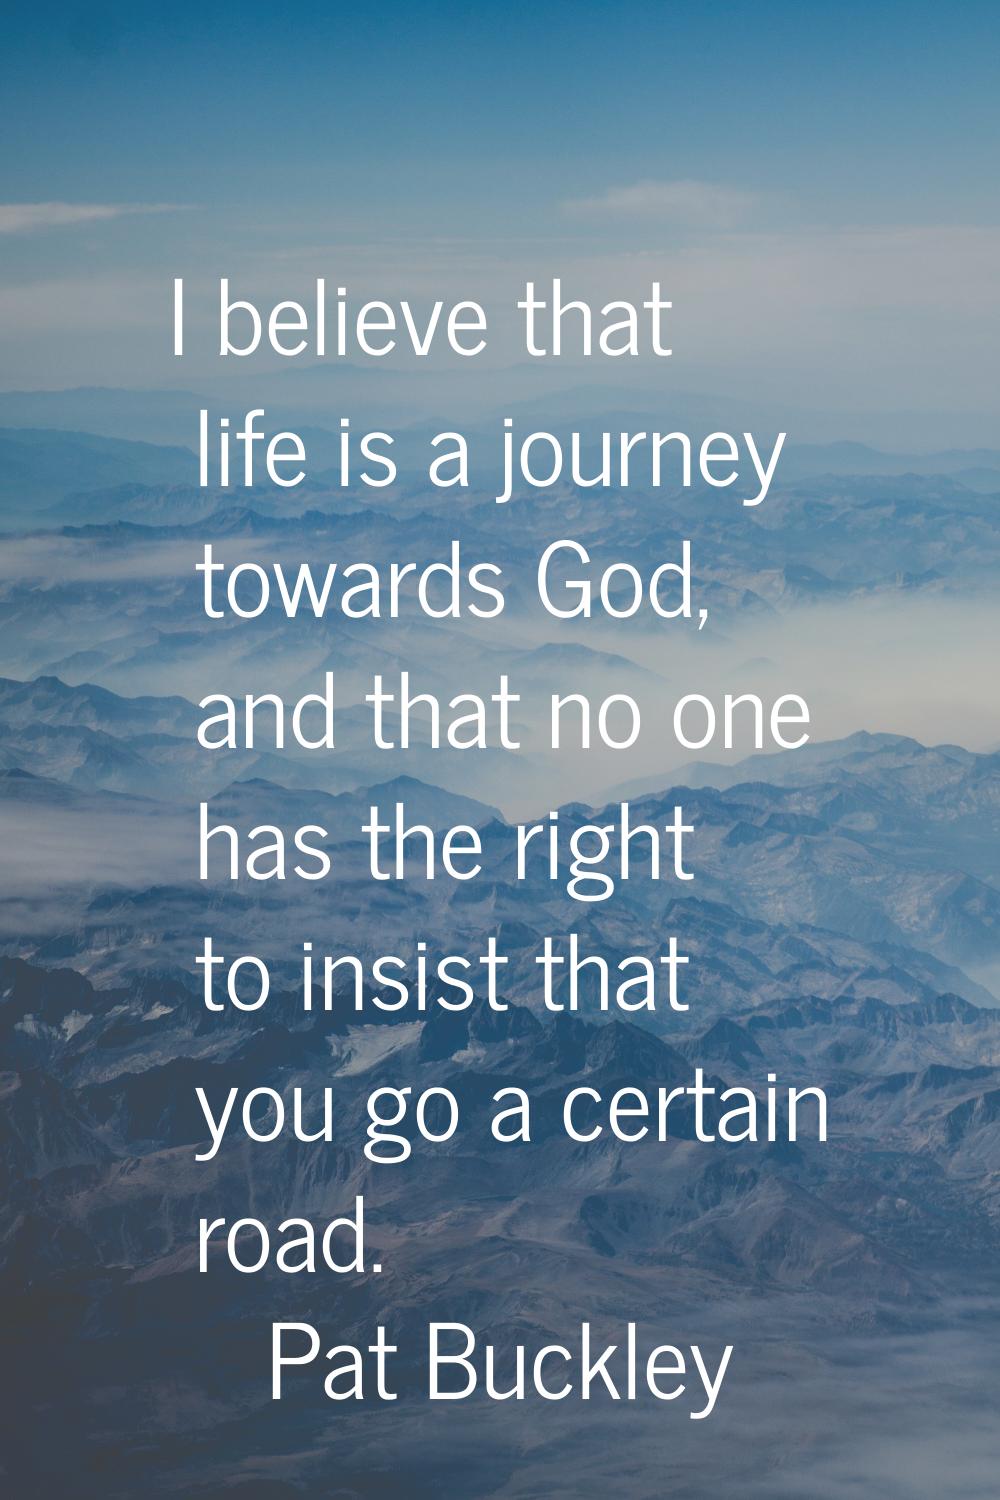 I believe that life is a journey towards God, and that no one has the right to insist that you go a